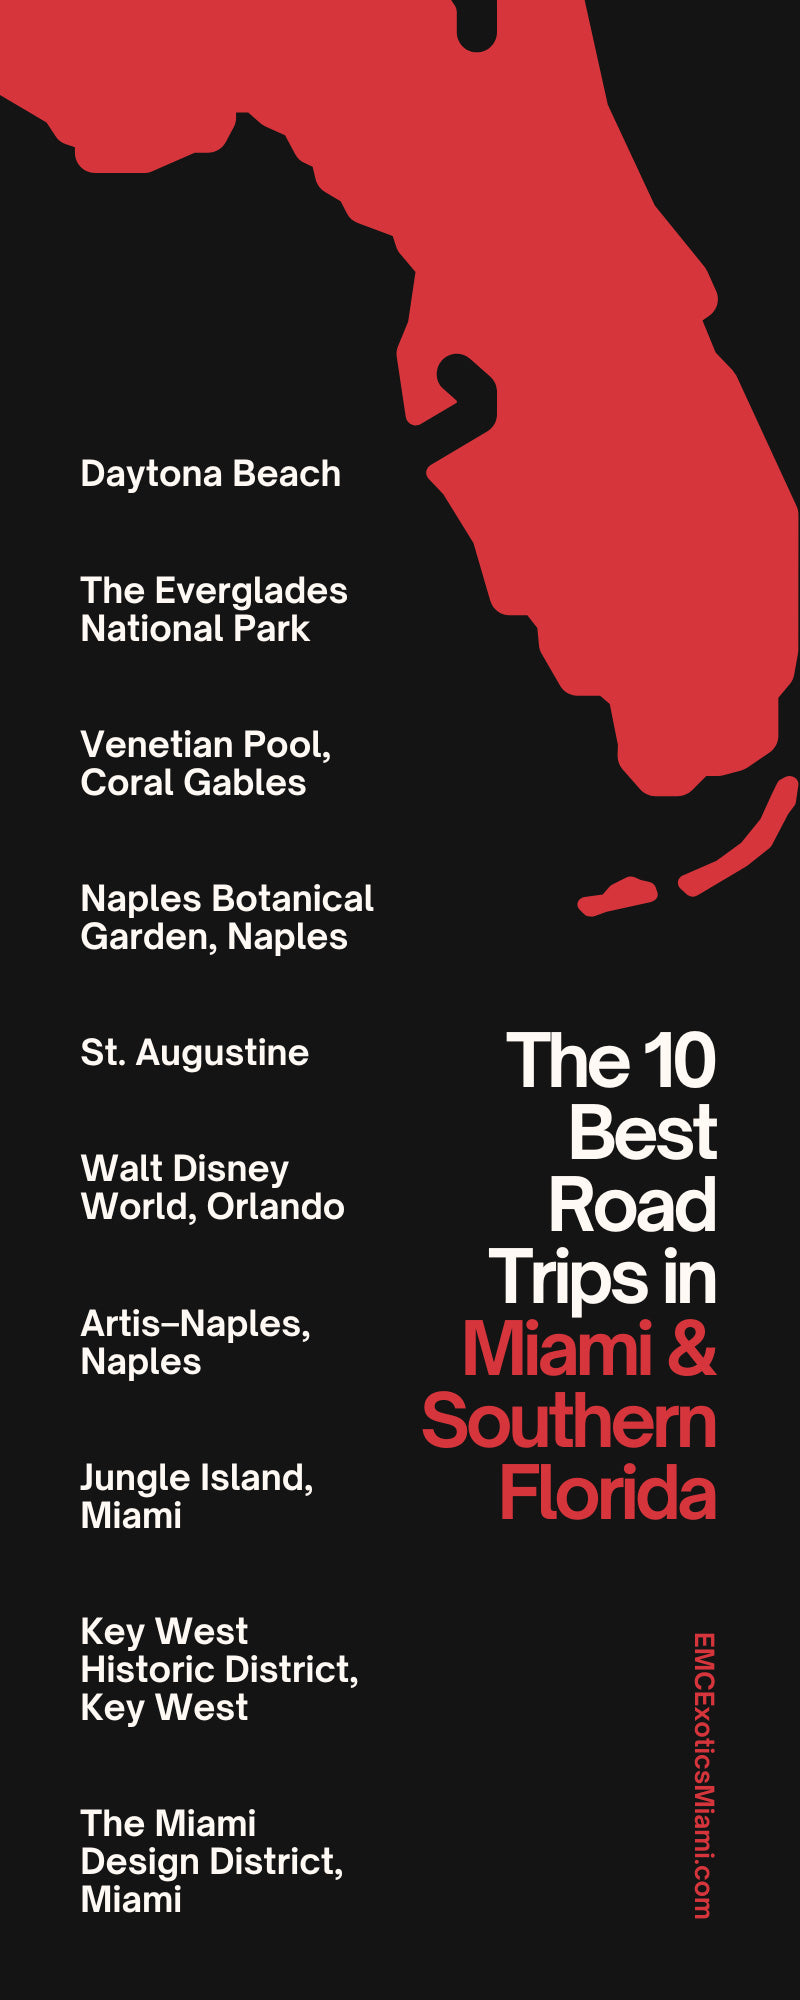 The 10 Best Road Trips in Miami & Southern Florida